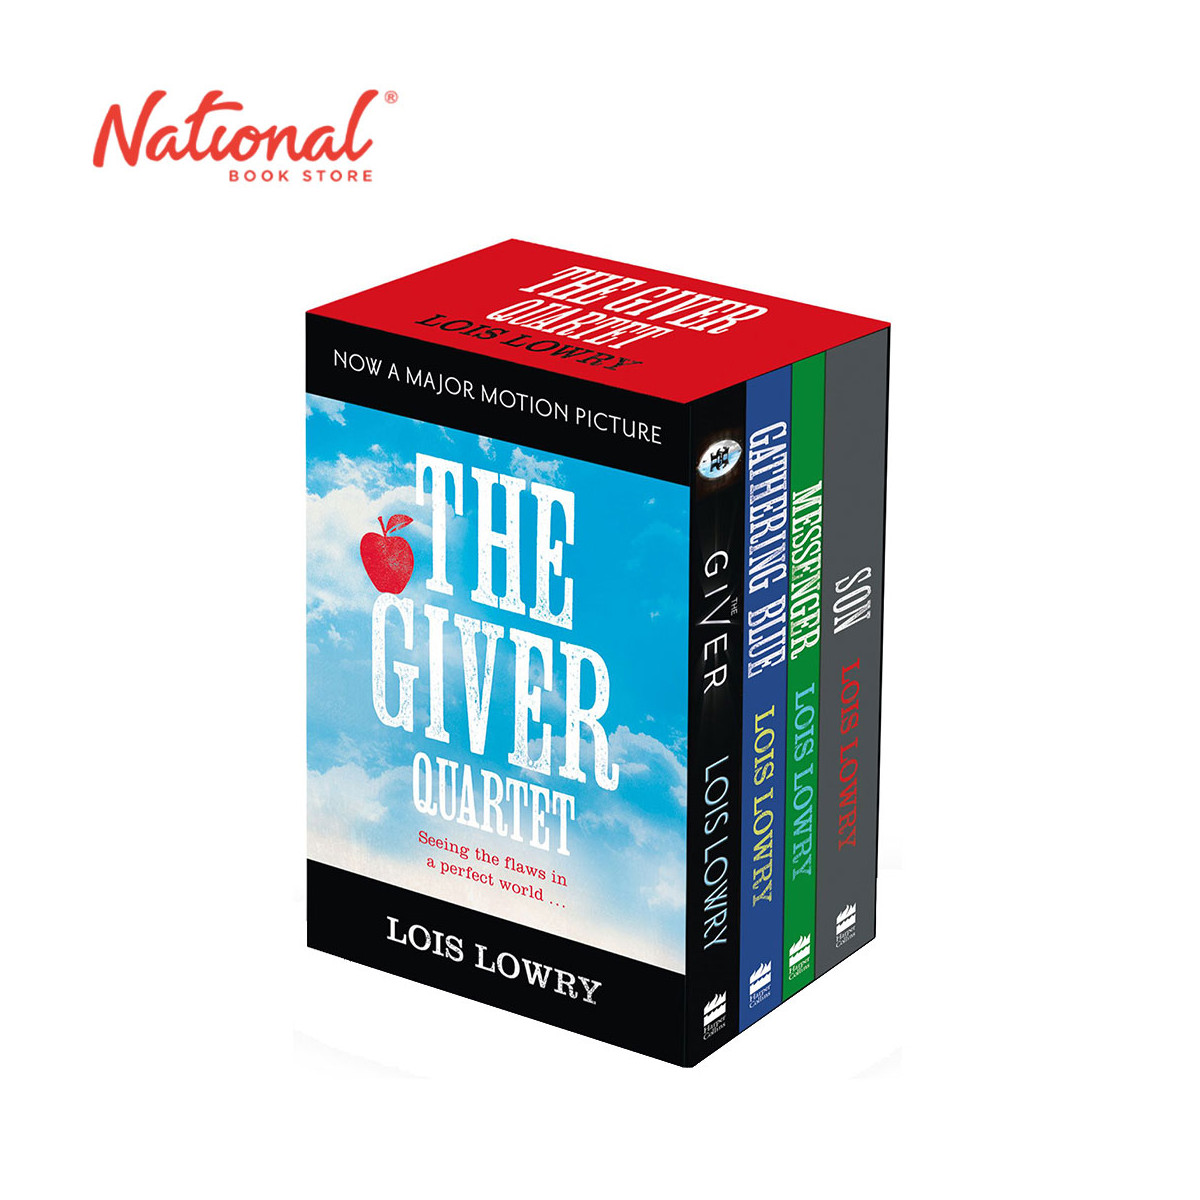 Giver Quarter Collection Volume 4 Box Set By Lois Lowry - Young Adult Fiction